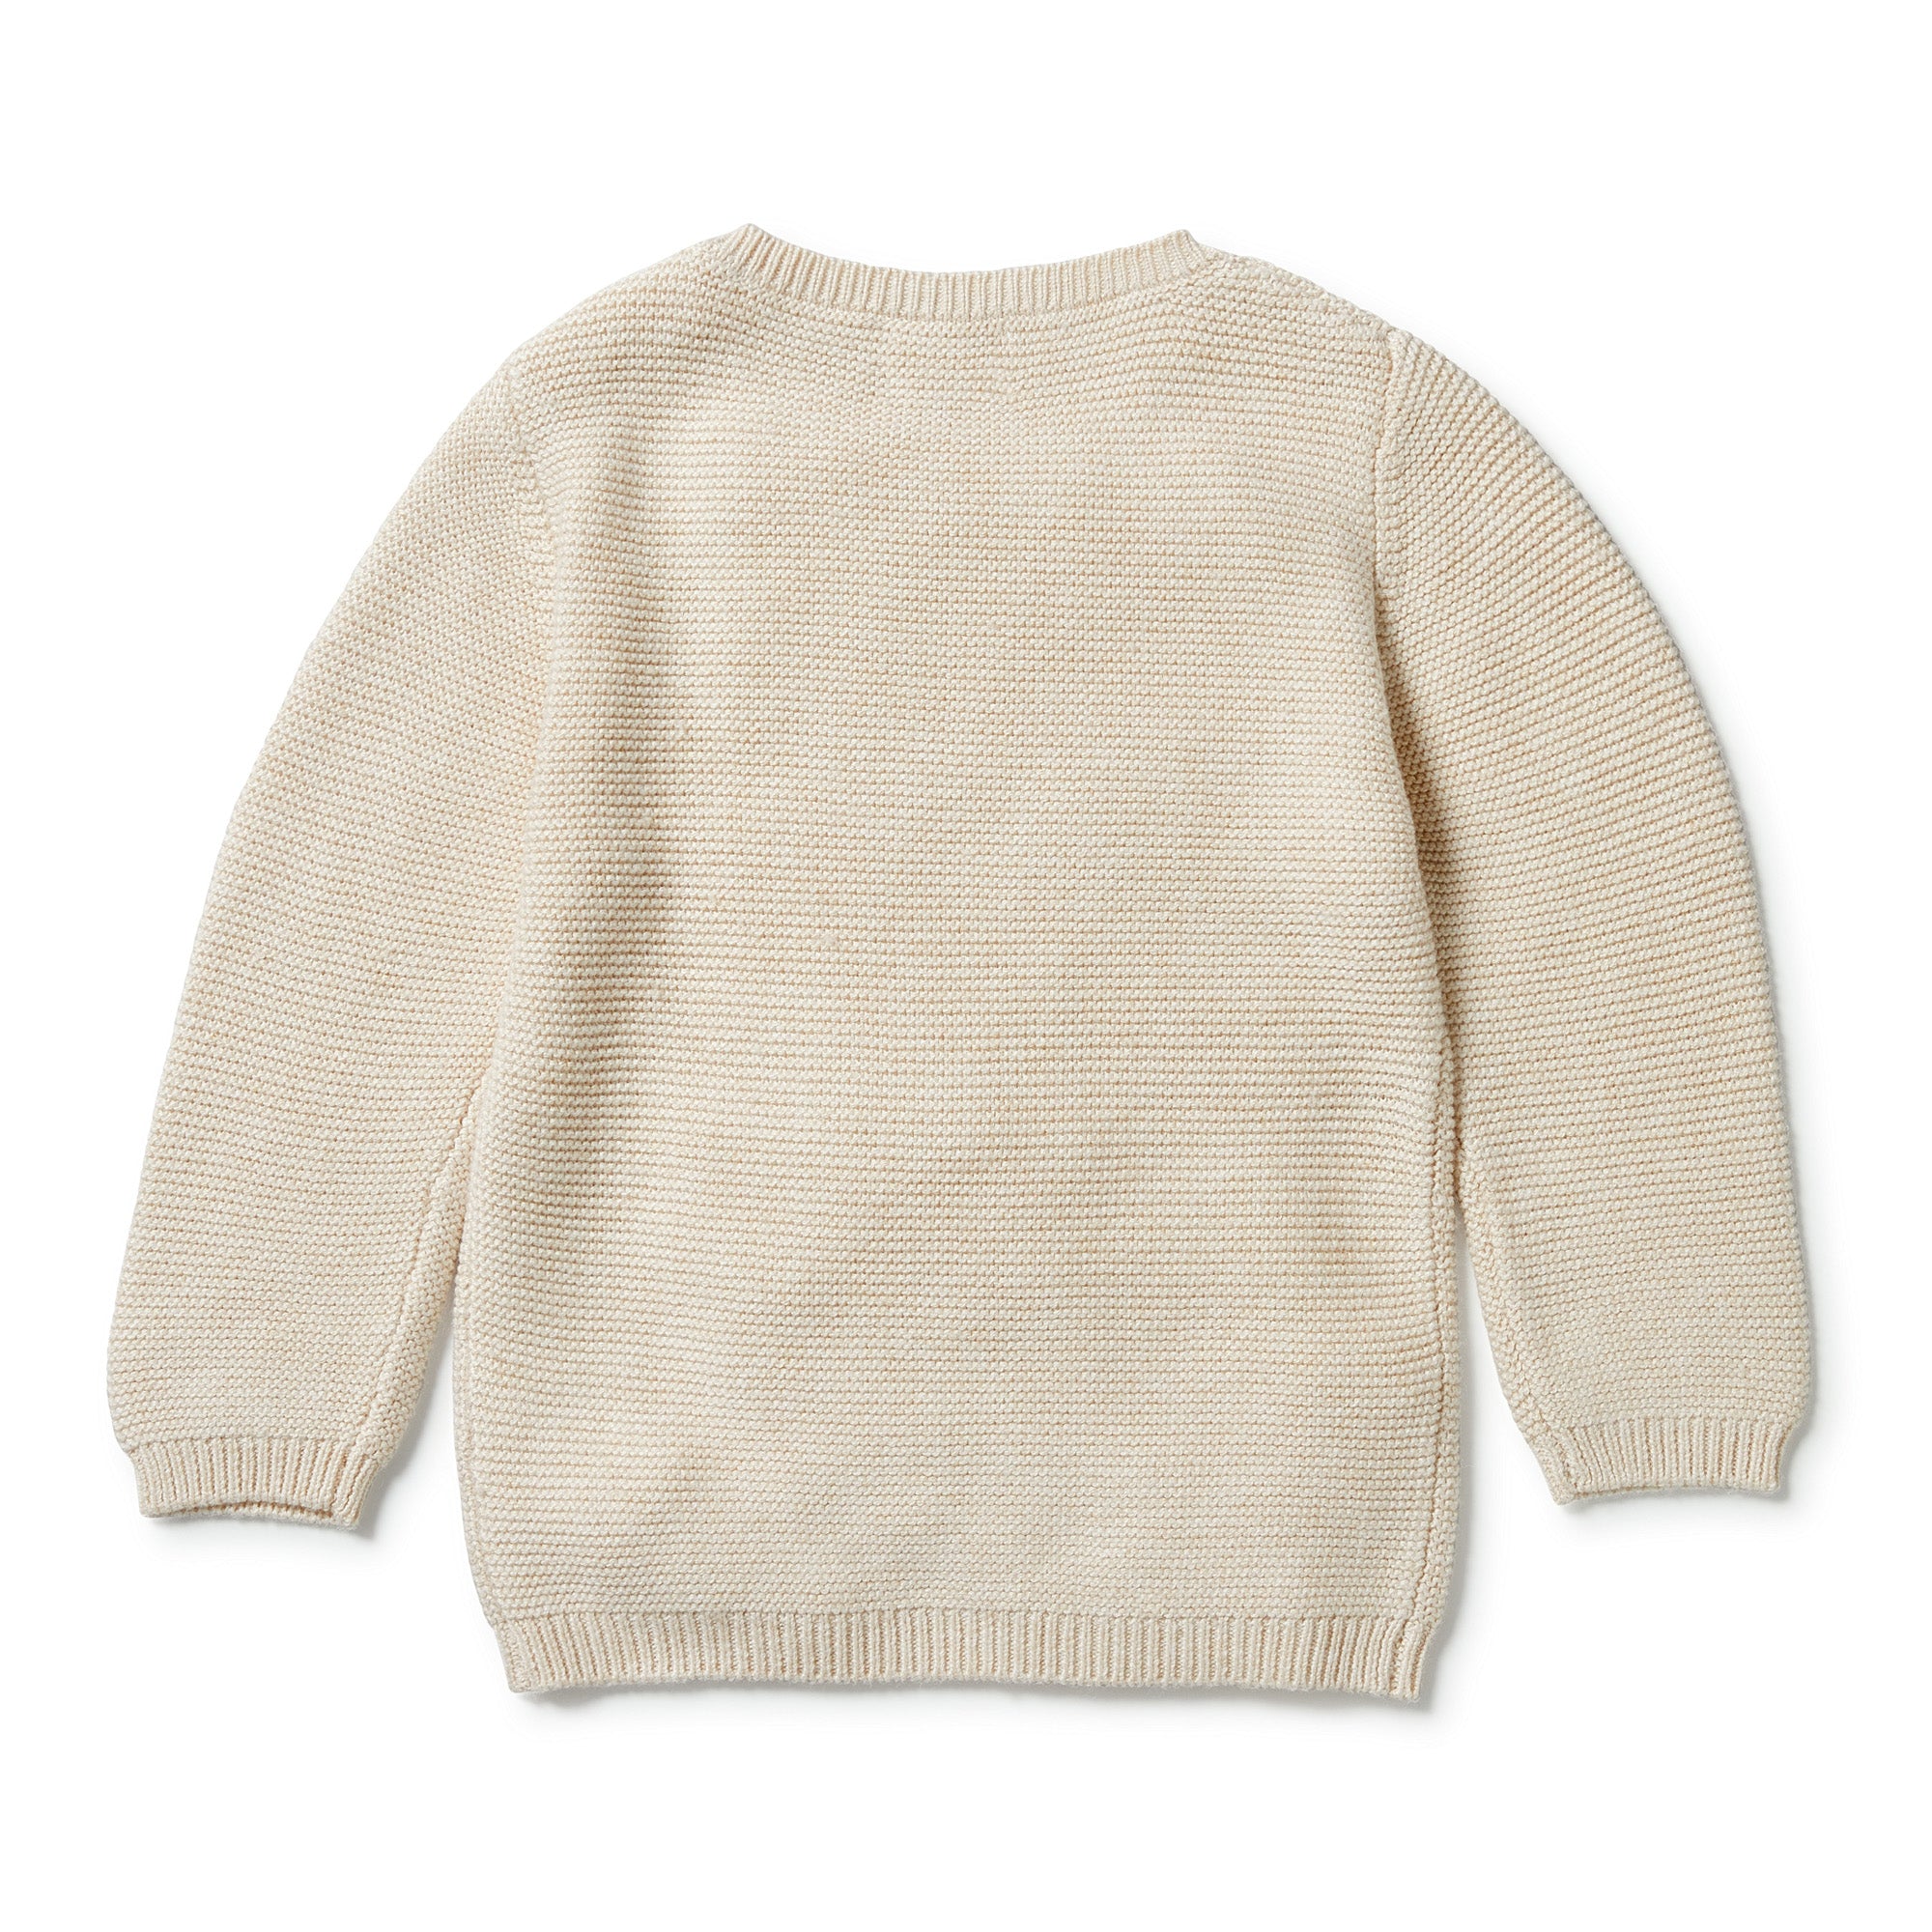 Wilson & Frenchy - Knitted Cable Jumper - Sand Melange (3 Yrs)